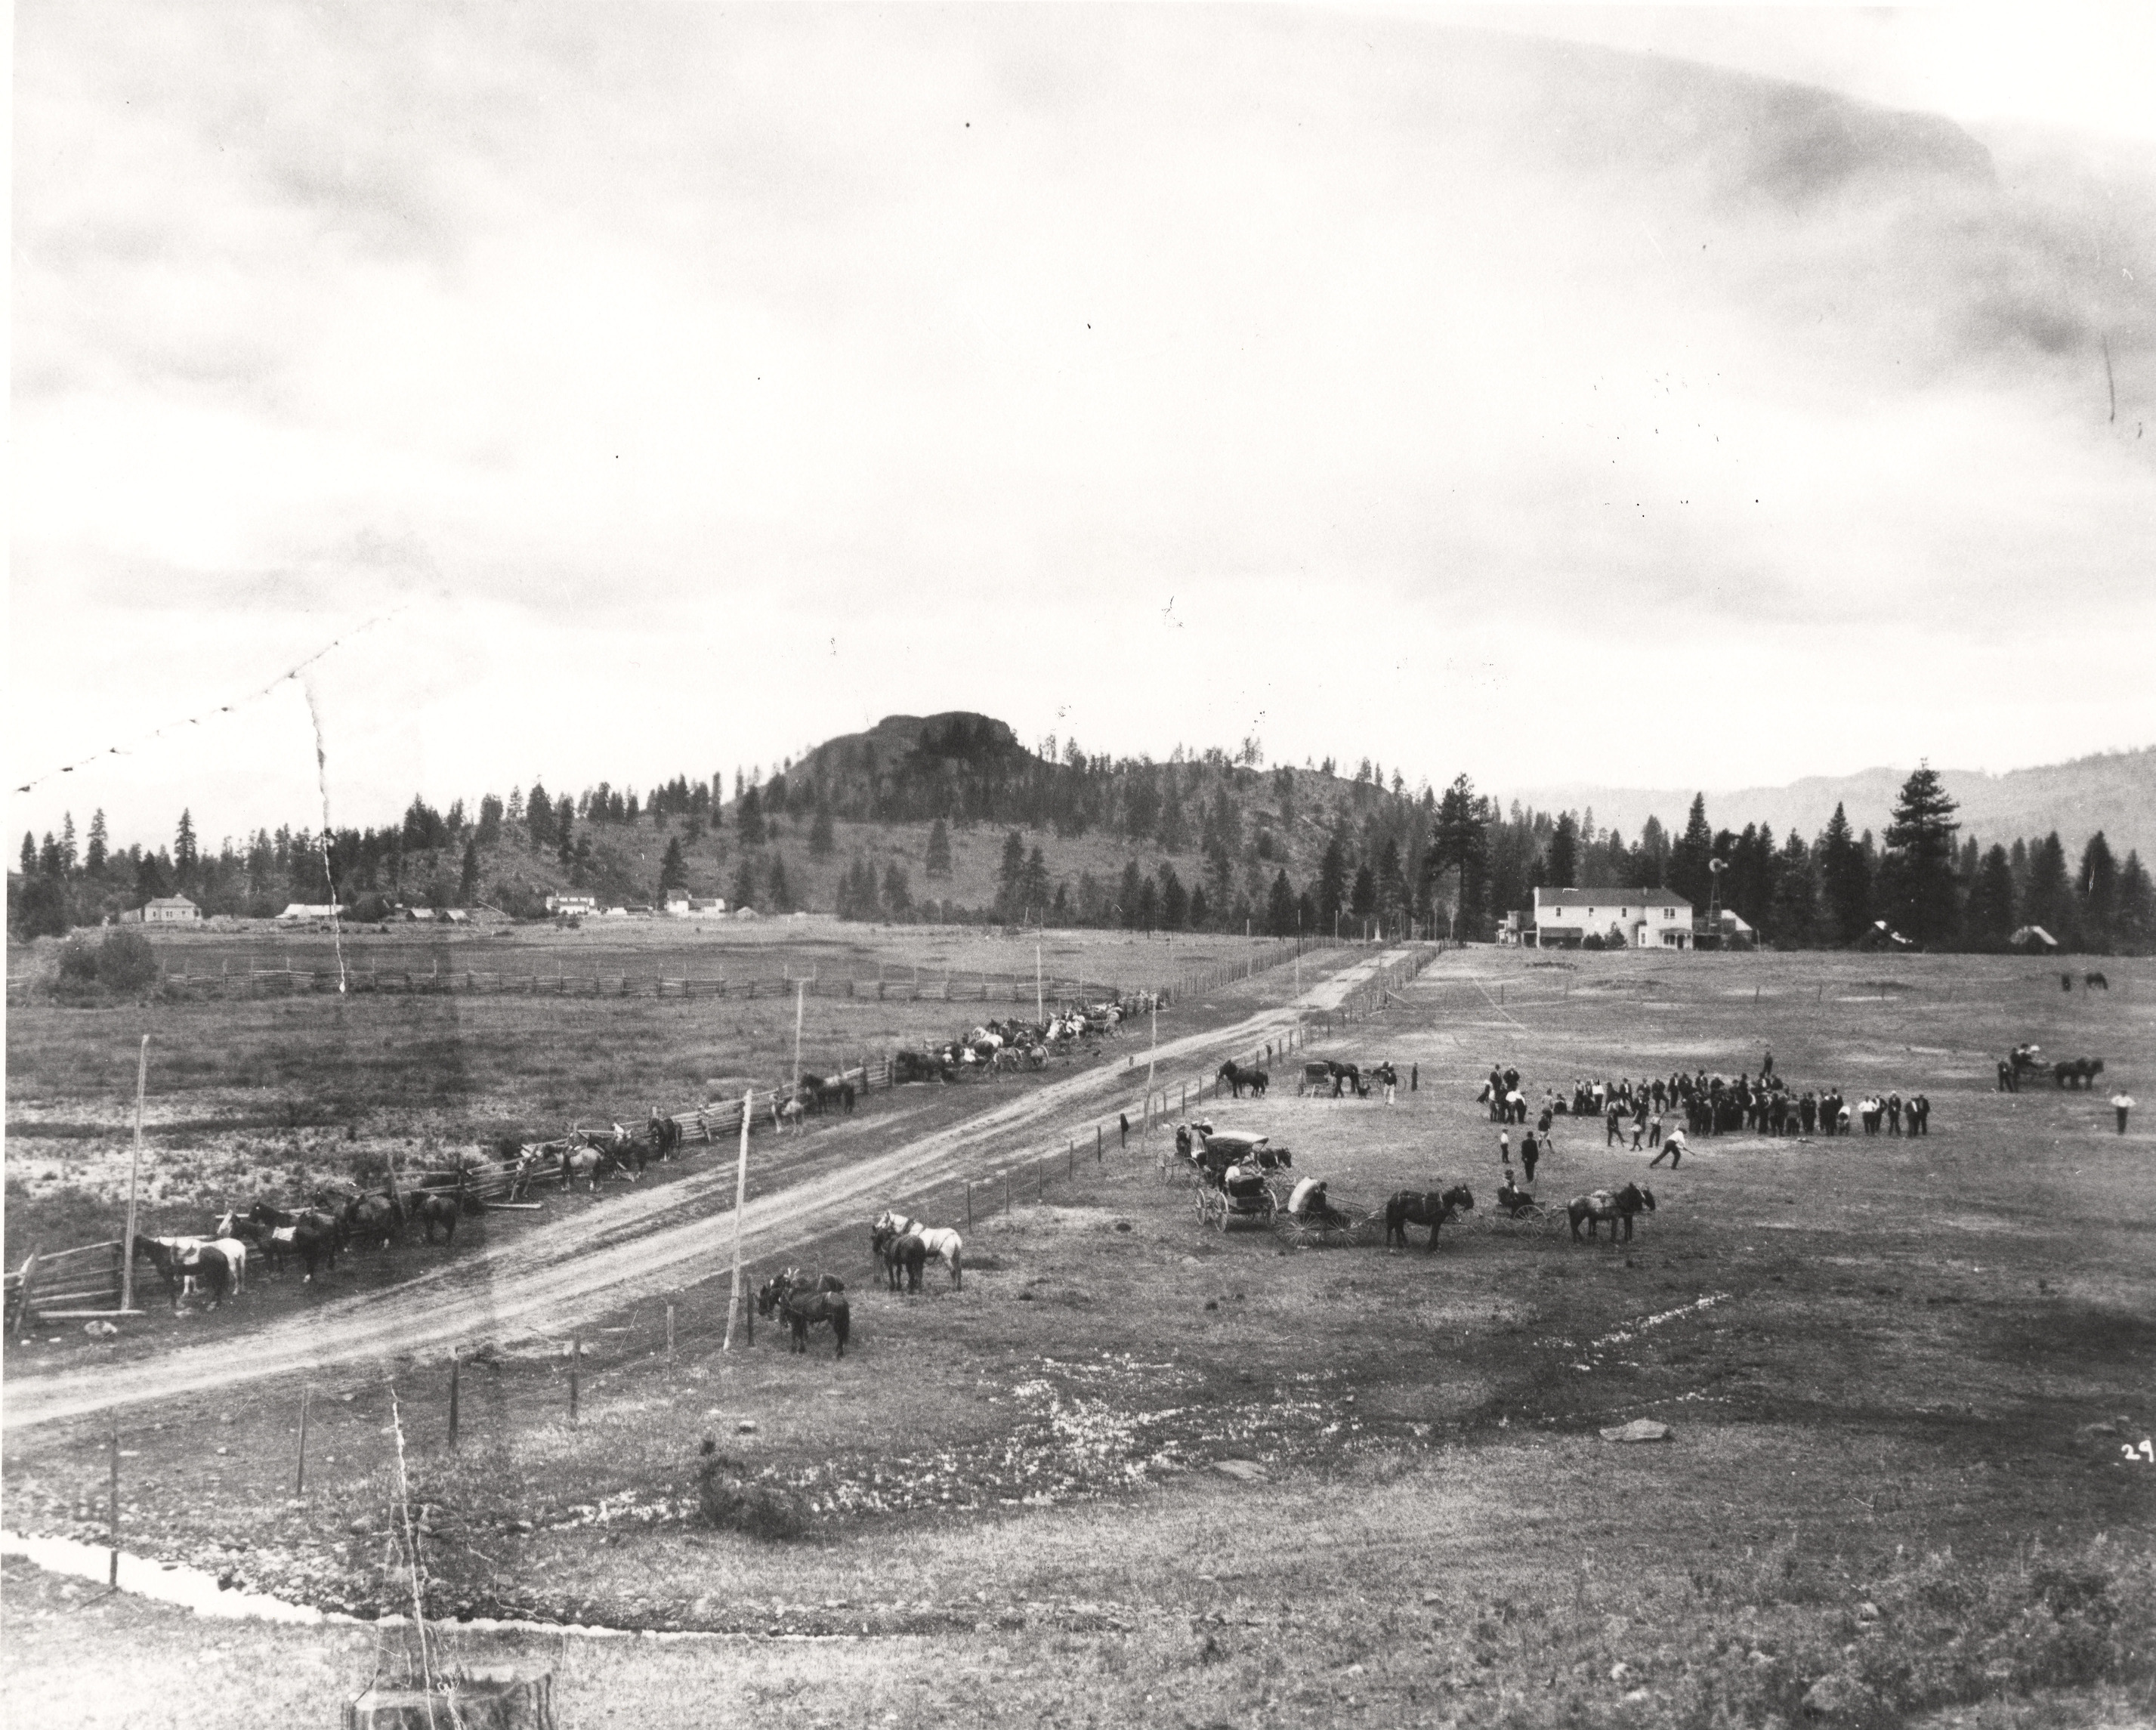 Black and white photograph of a road through an open field with people, horses, and buggies gathered next to the road. 